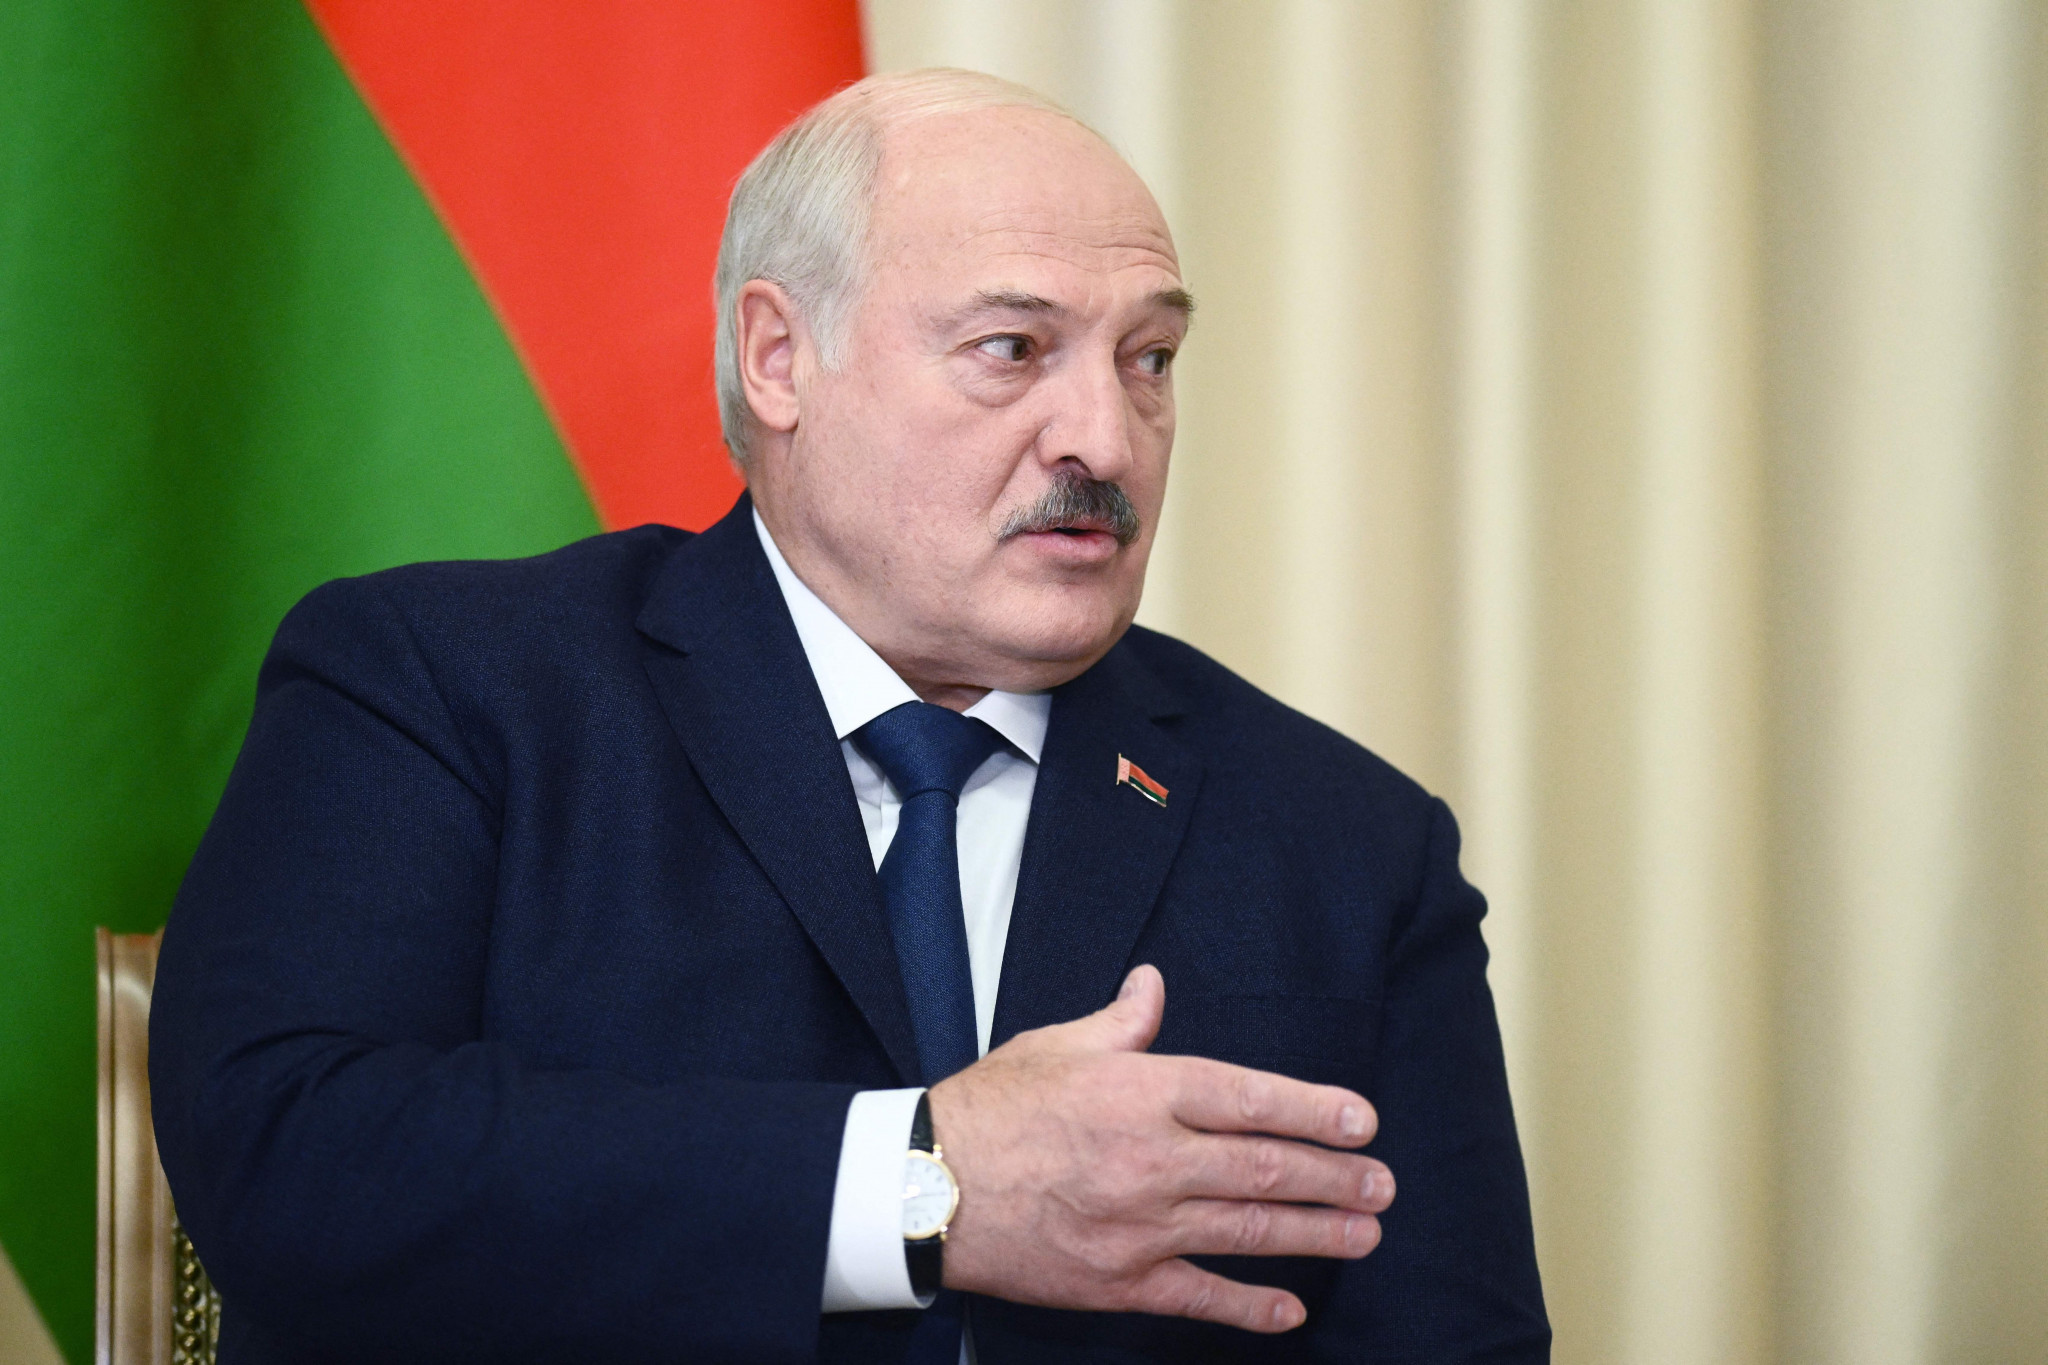 Belarusian President Alexander Lukashenko has claimed that the country's athletes competing under a neutral flag would not reduce national pride in their performance ©Getty Images